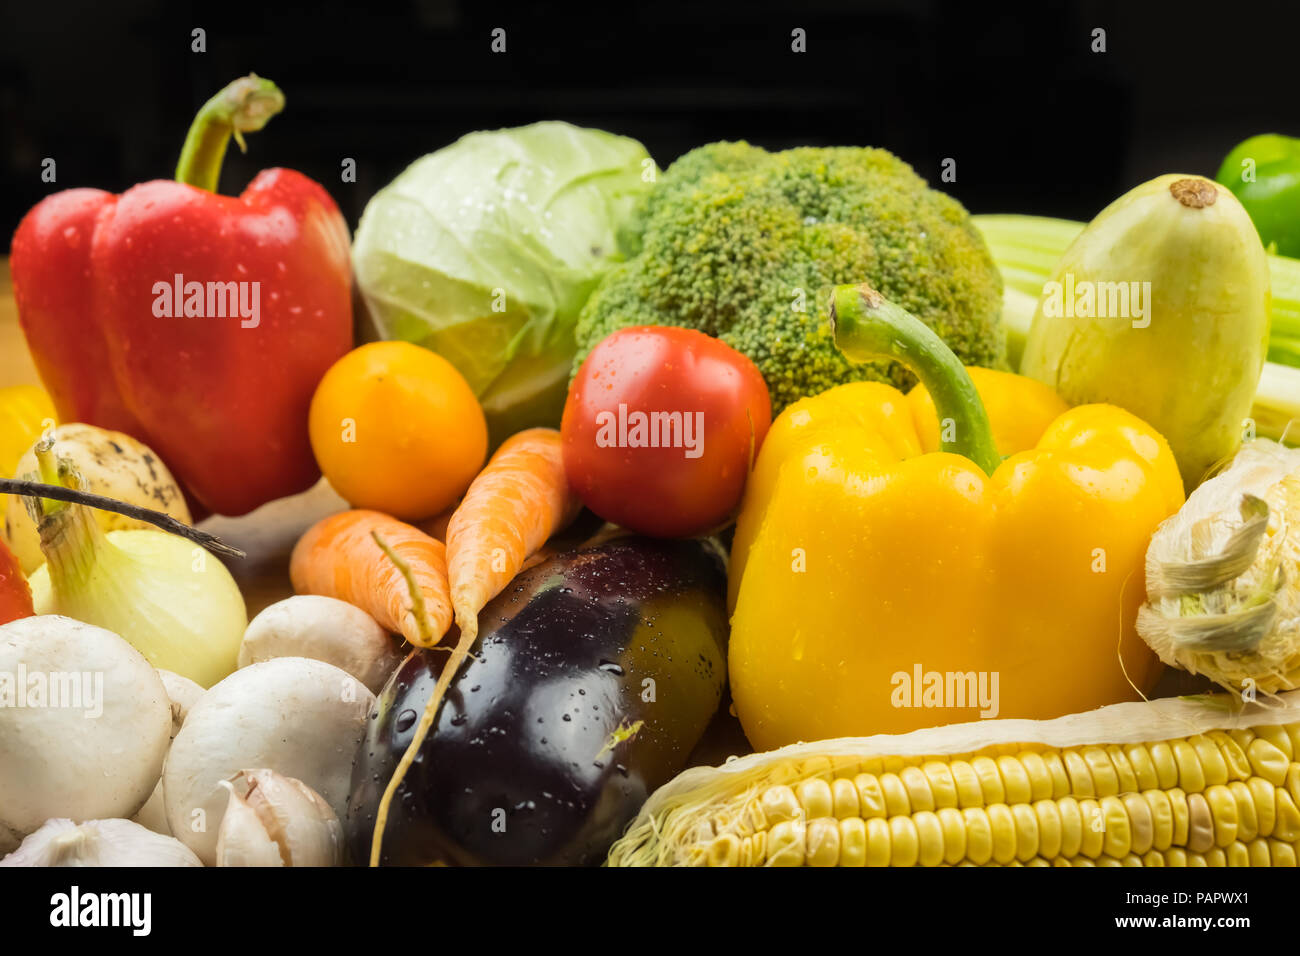 Close-up image of fresh organic vegetables. Locally grown bell pepper, corn, carrot, mushrooms and other natural vegan food. Stock Photo